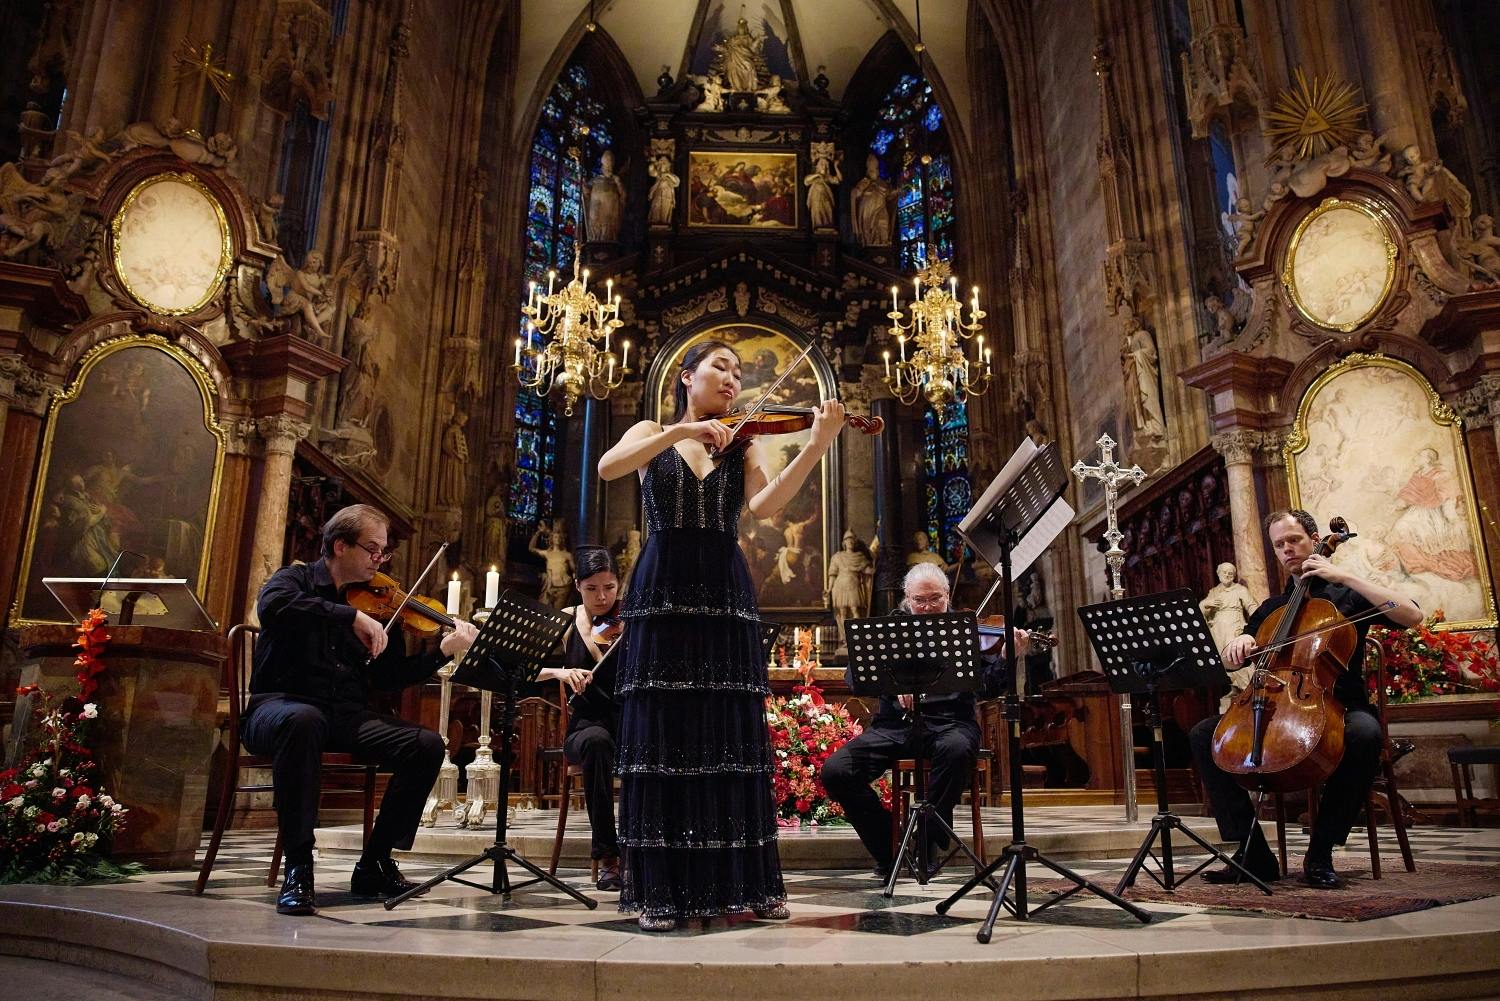 Vivaldi's Four Seasons at St. Stephen's Cathedral in Vienna